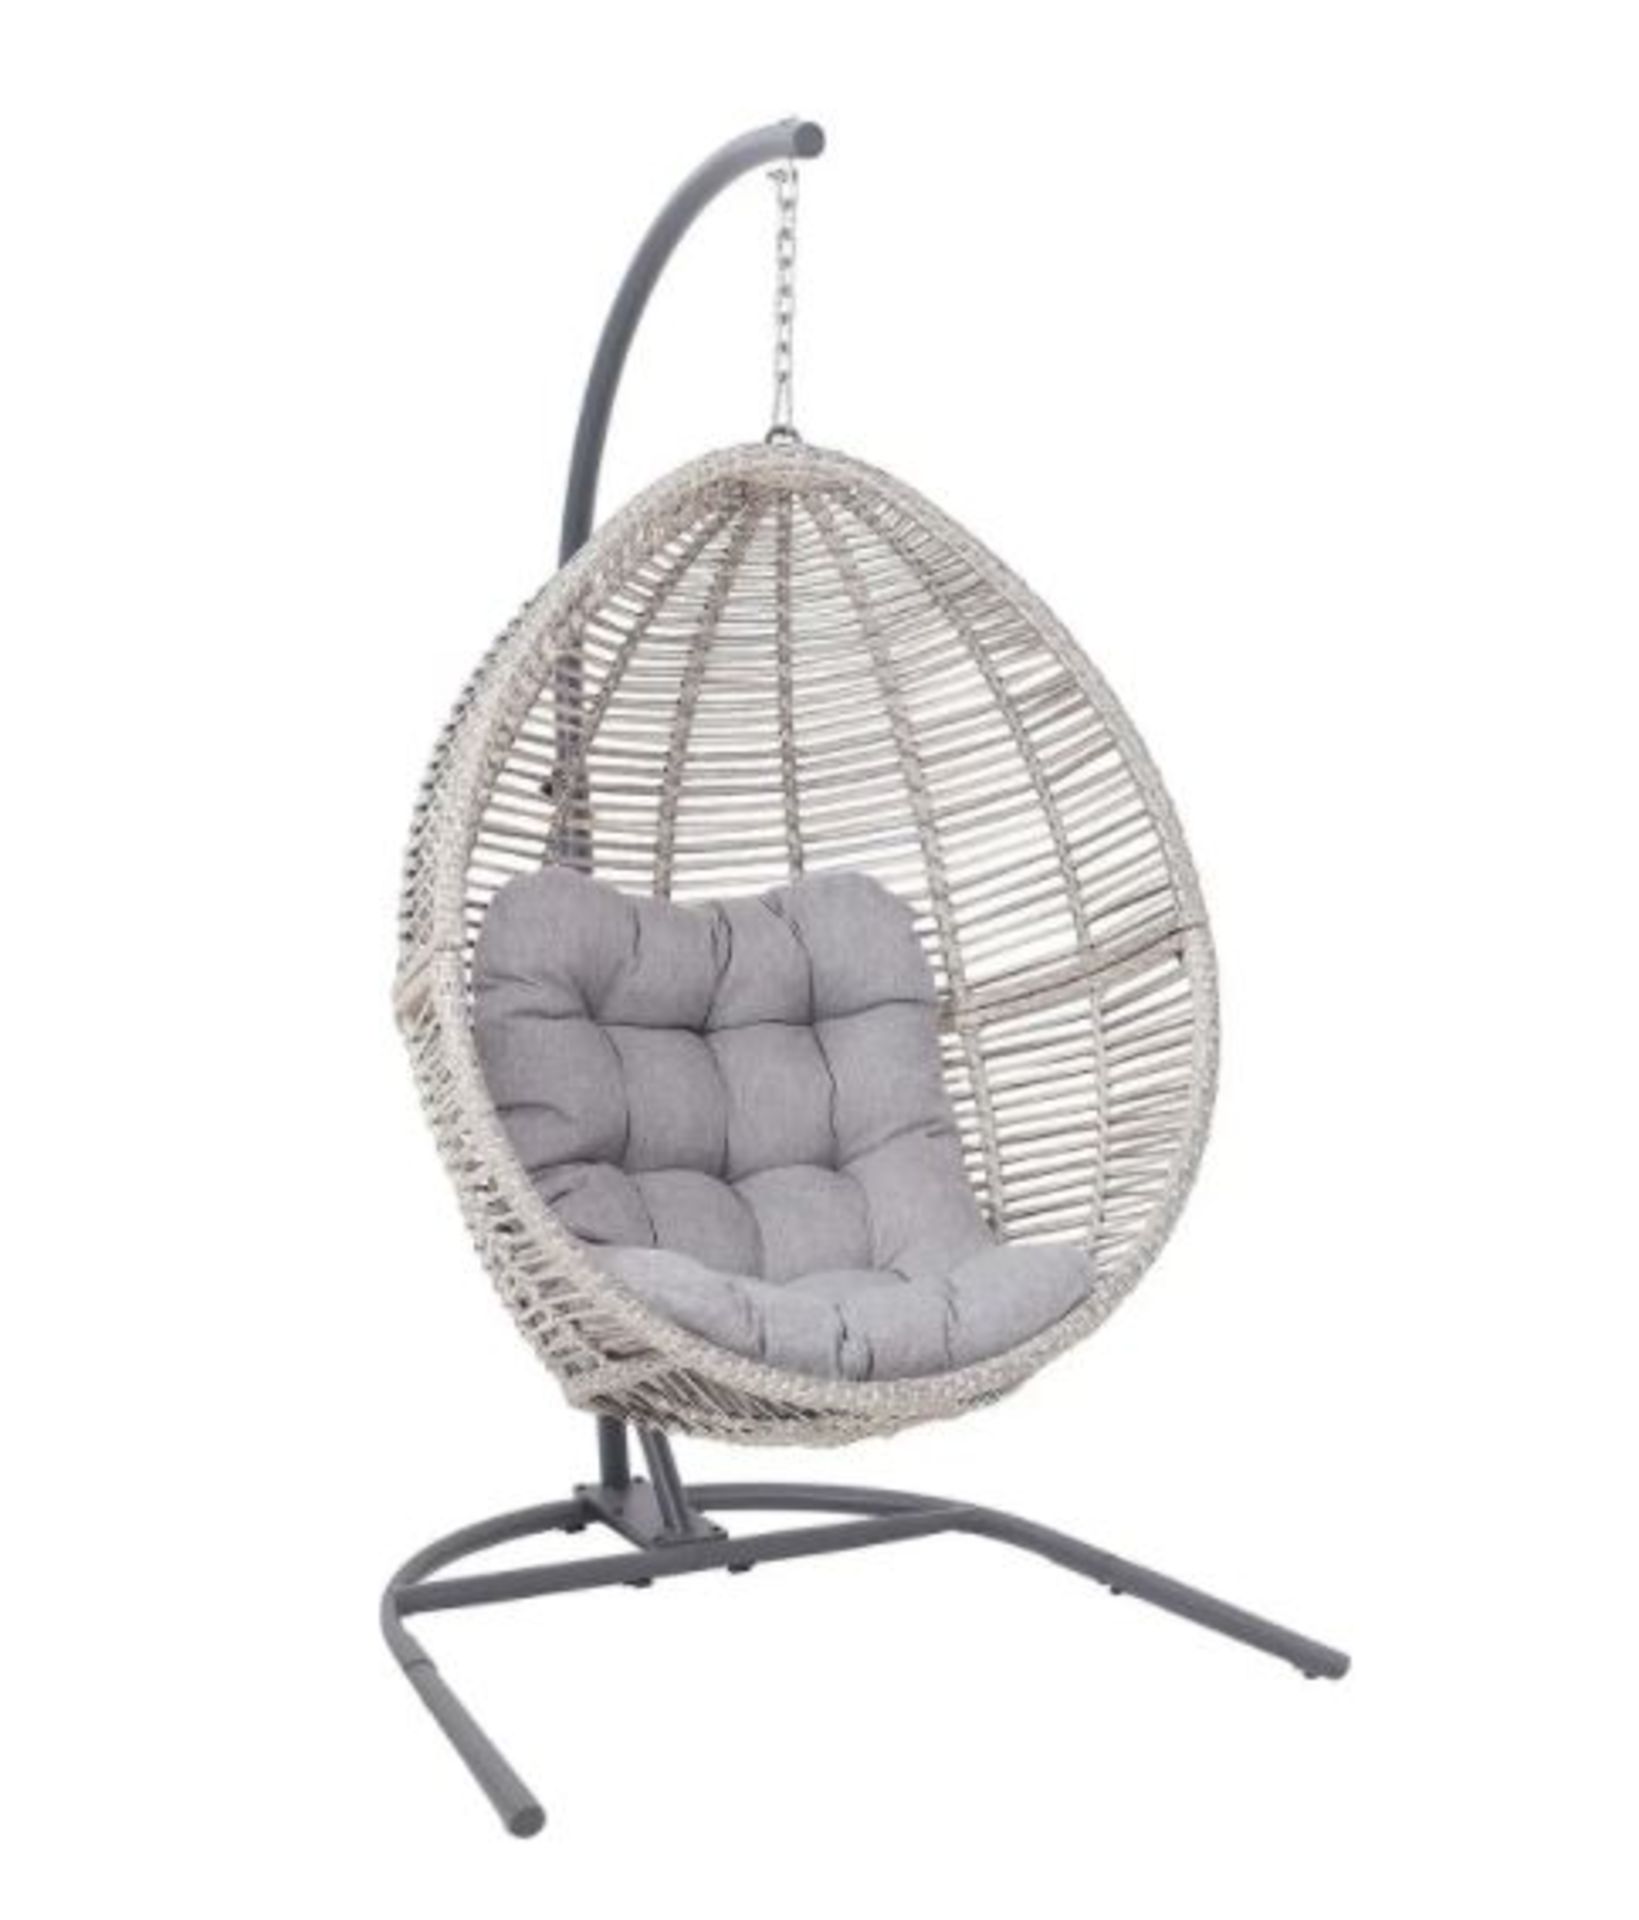 (R8E) 1x Florence Hanging Chair RRP £280. With 1x Cushion. (H198 x W116 x D118cm) - Image 2 of 3